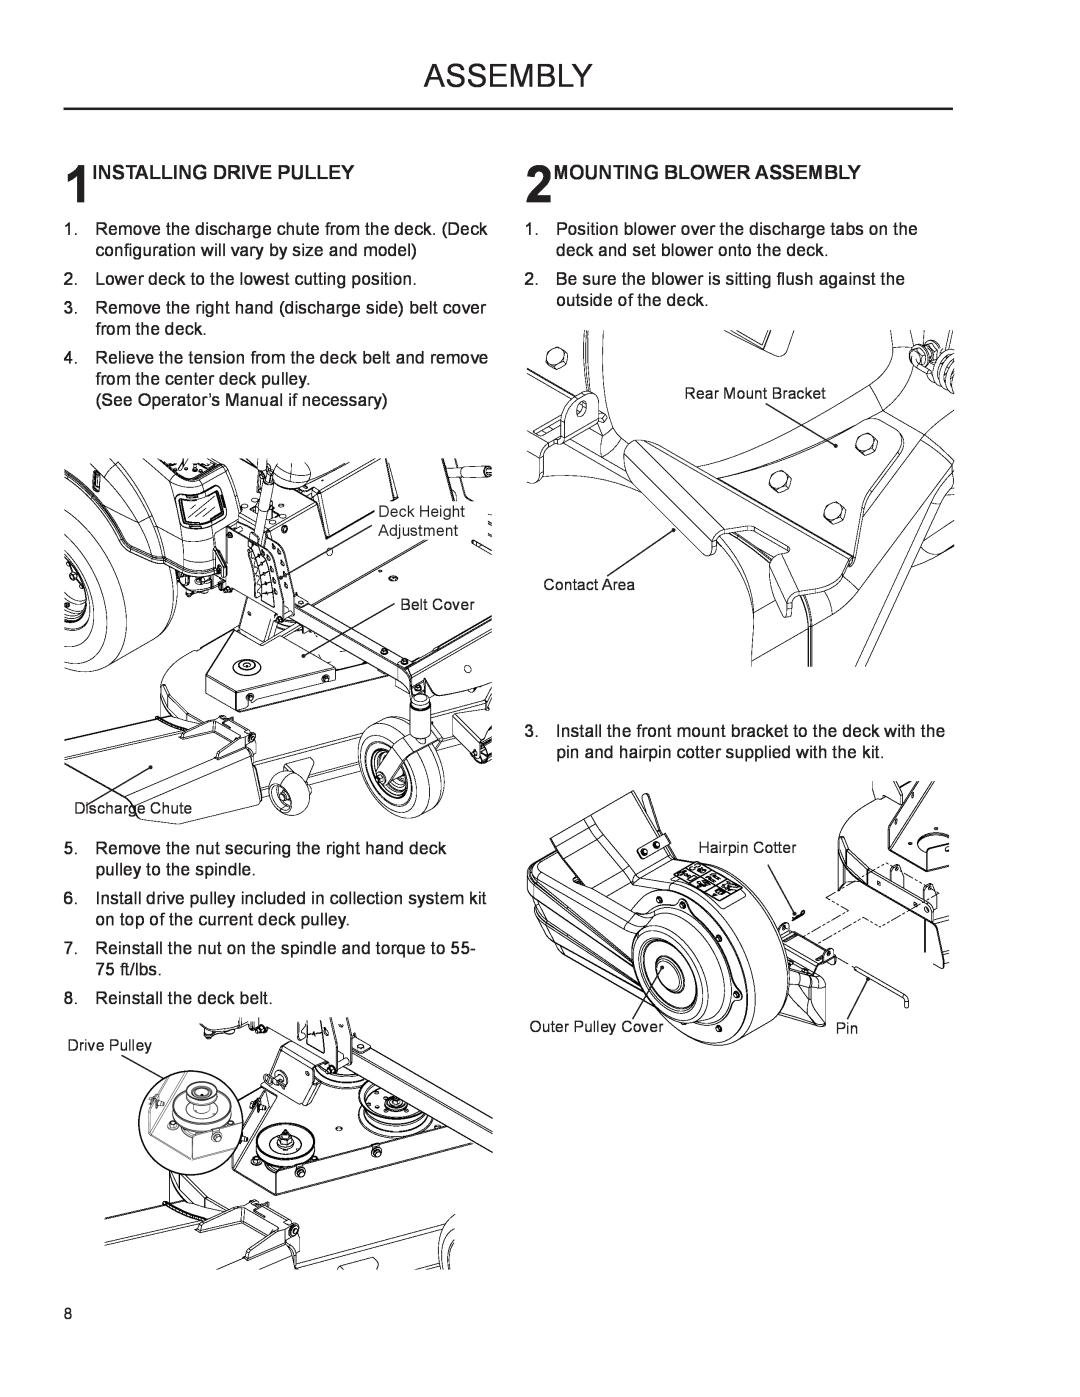 Husqvarna 2345 XLS, XOUS2009 manual Assembly, 1INSTALLING DRIVE PULLEY, 2MOUNTING BLOWER ASSEMBLY 